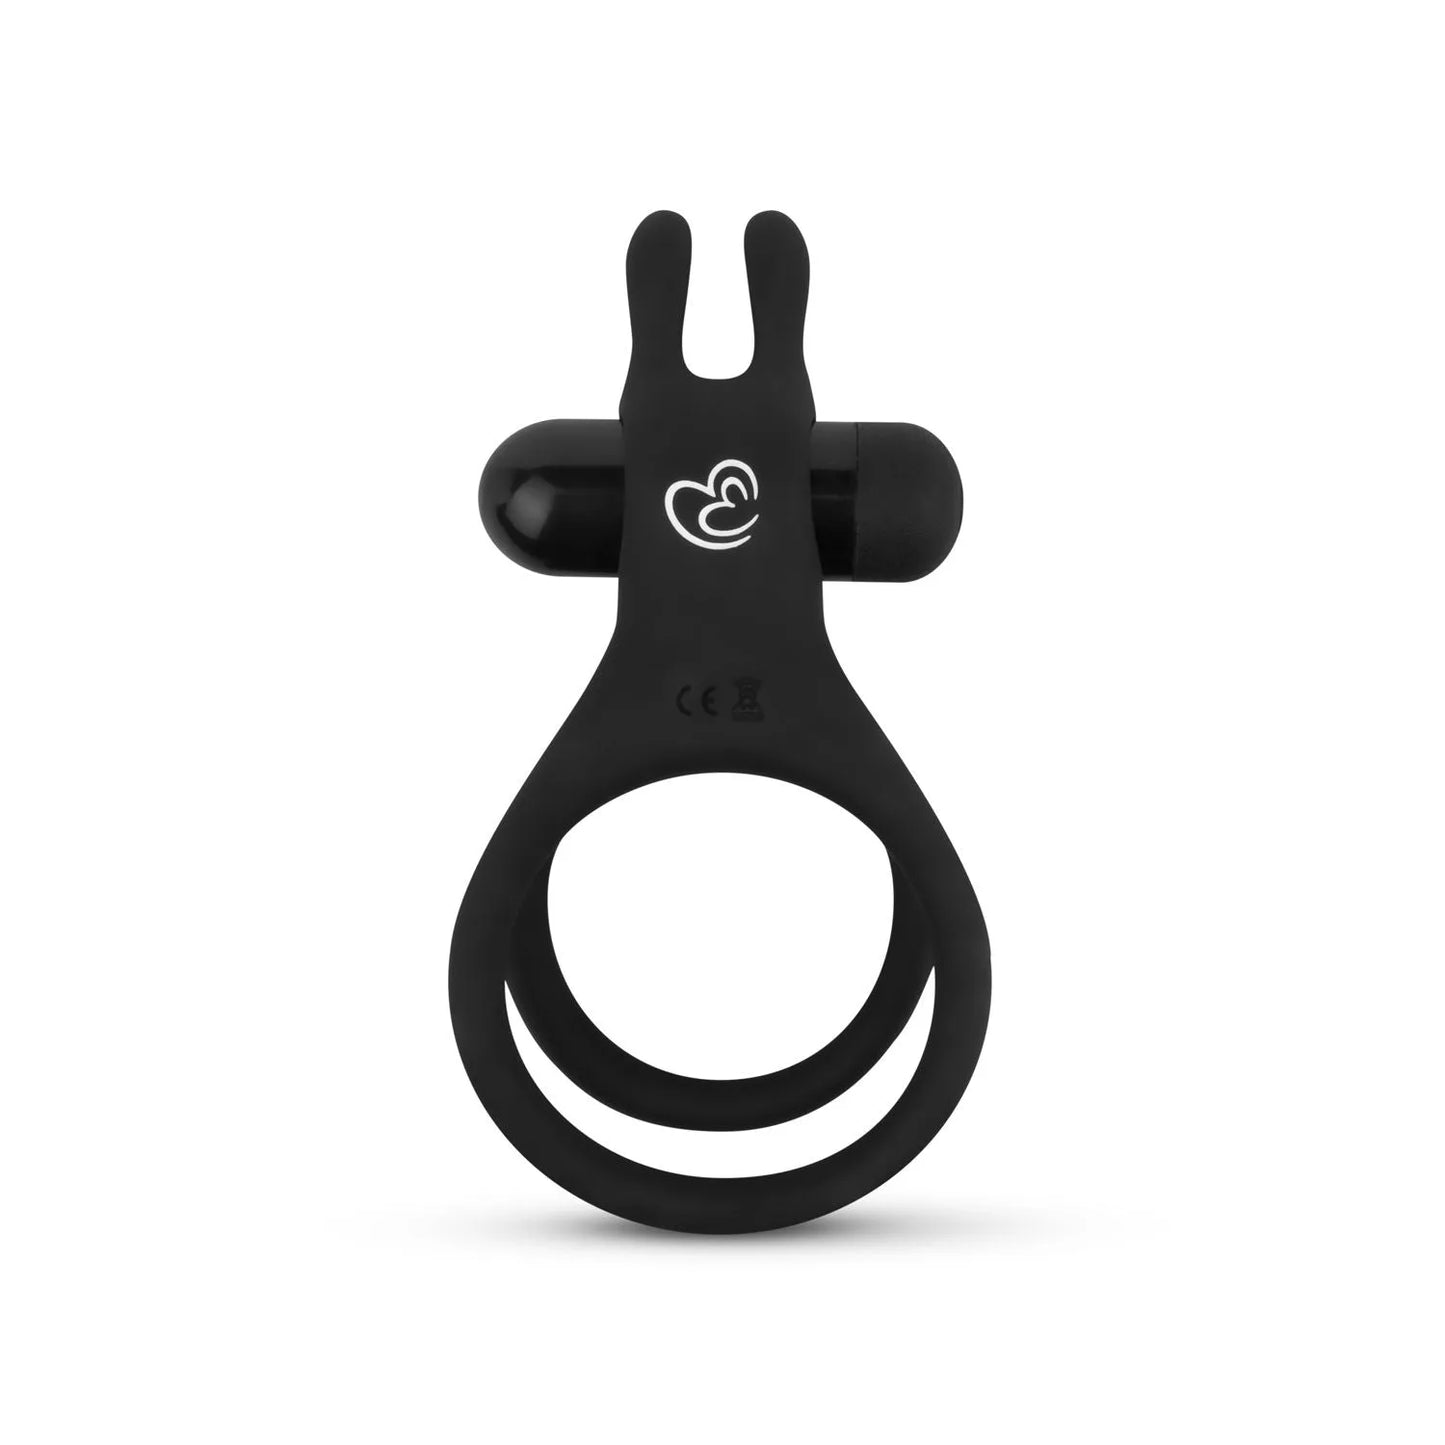 Share Ring - Double Vibrating Cock Ring with Rabbit Ears